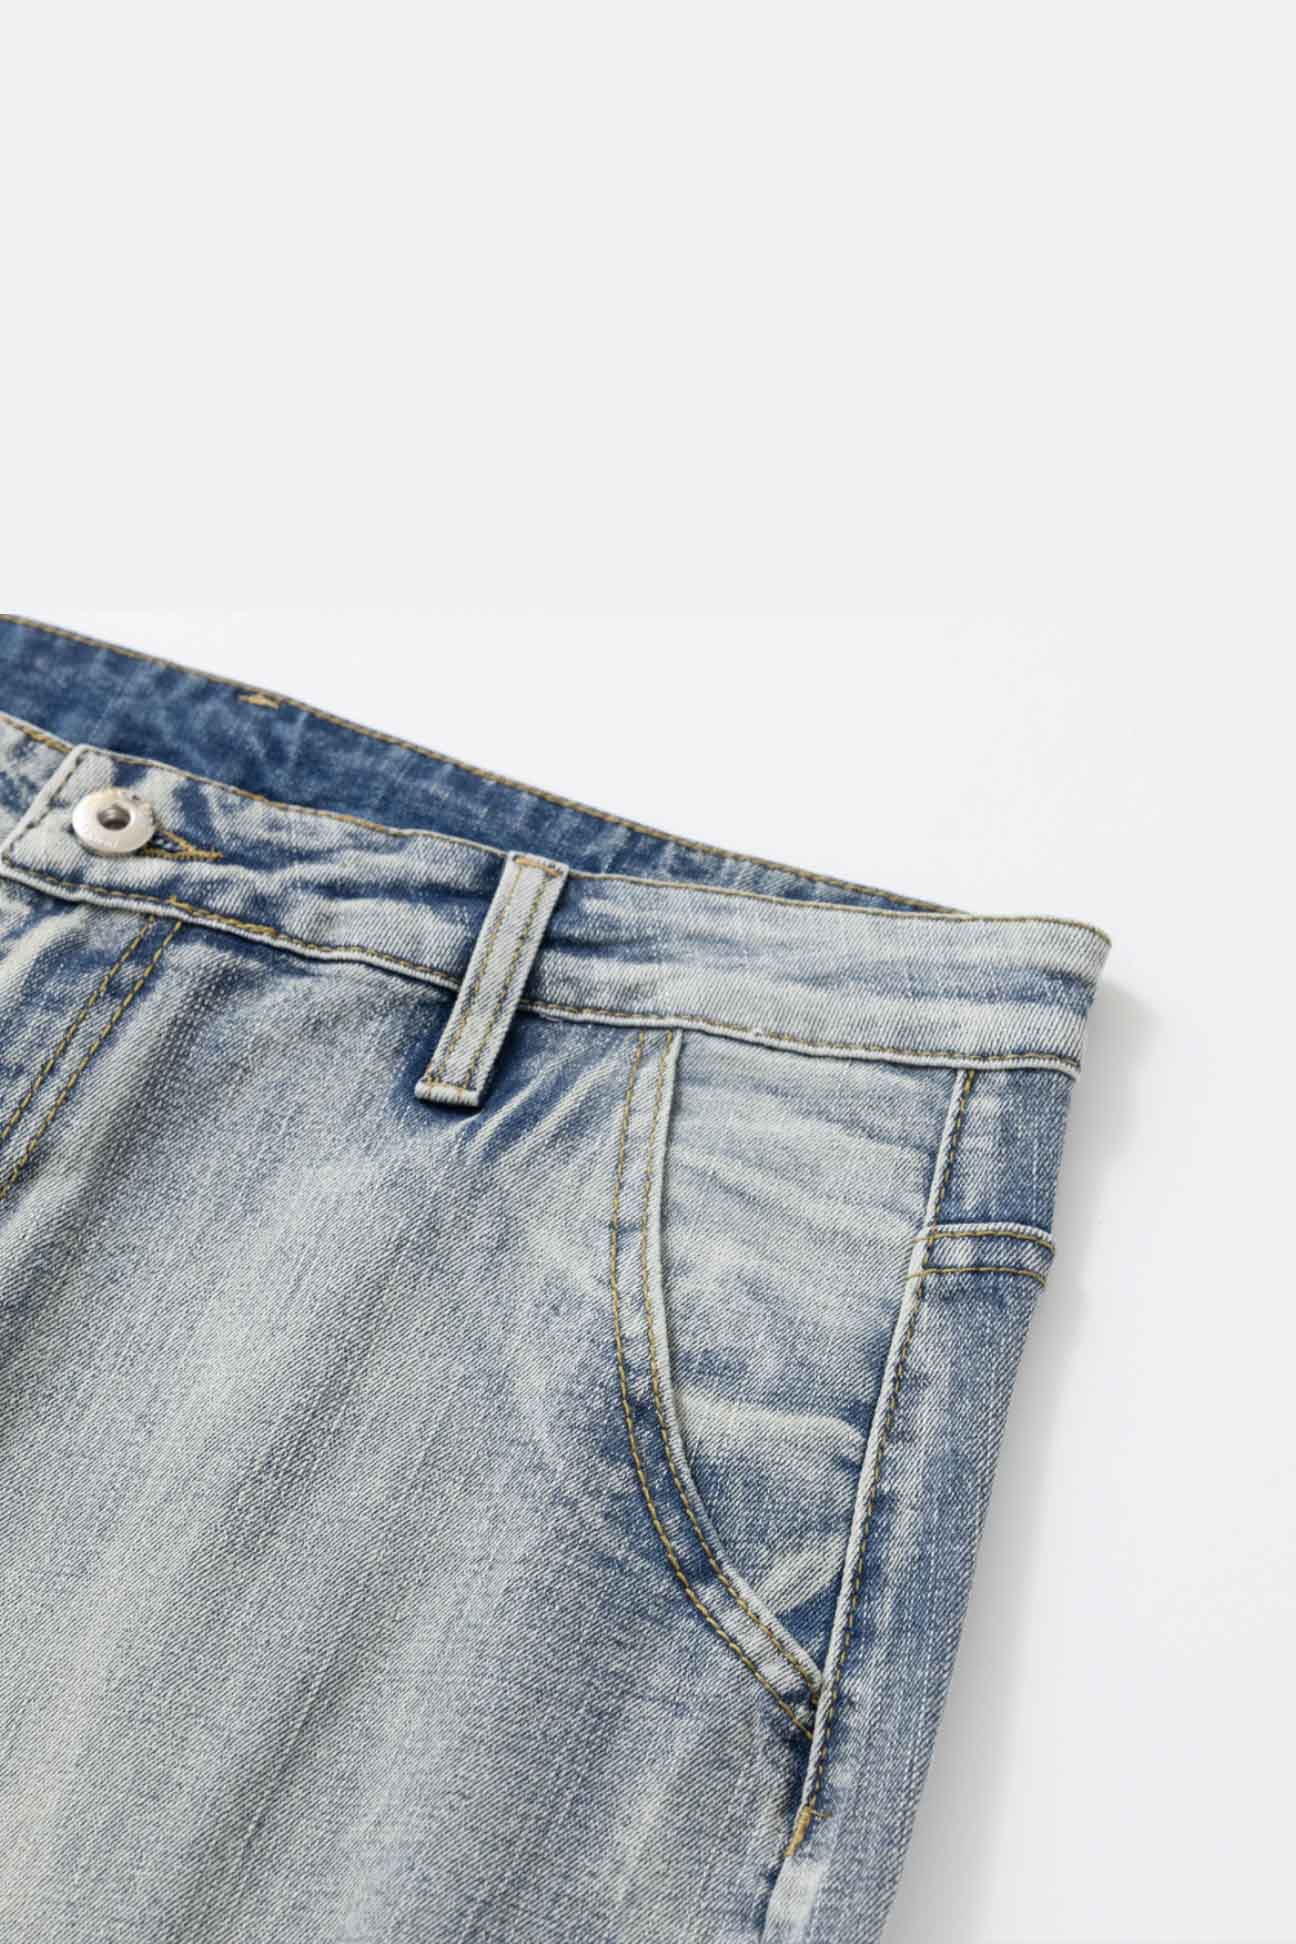 BUTTON STRAPPED VALKYRE JEANS